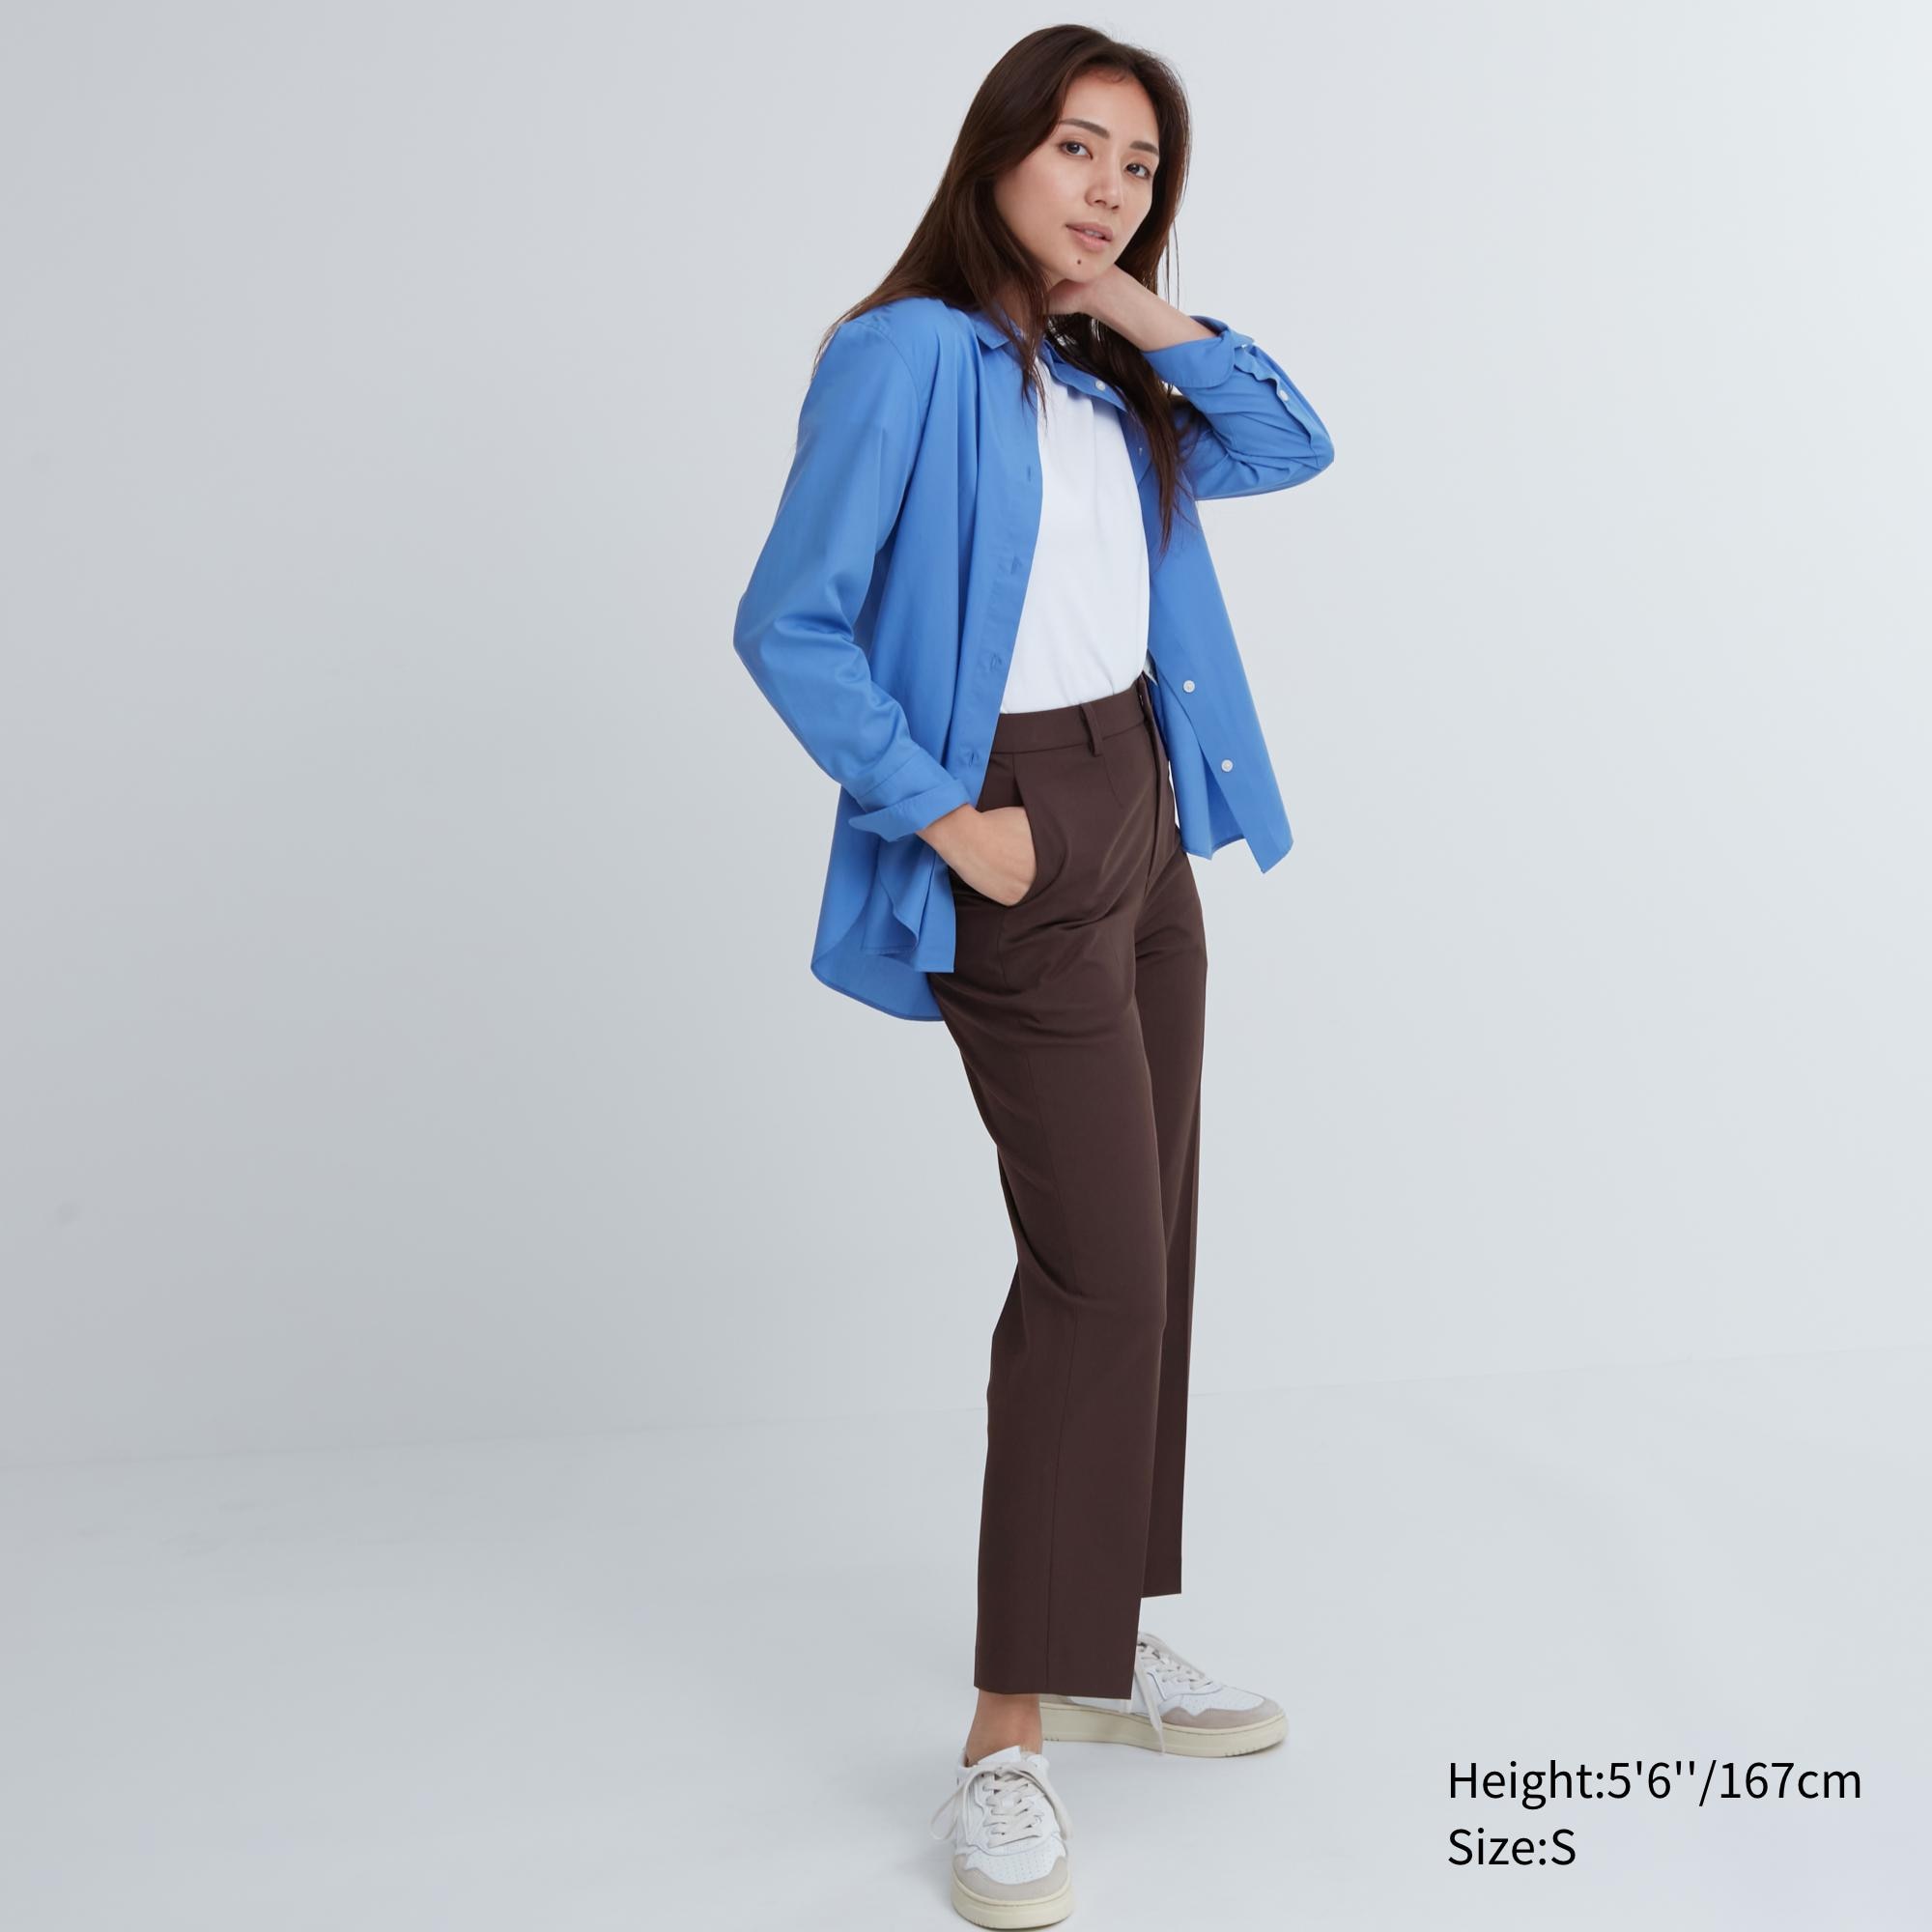 WOMENS LINEN COTTON TAPERED TROUSERS  UNIQLO IN